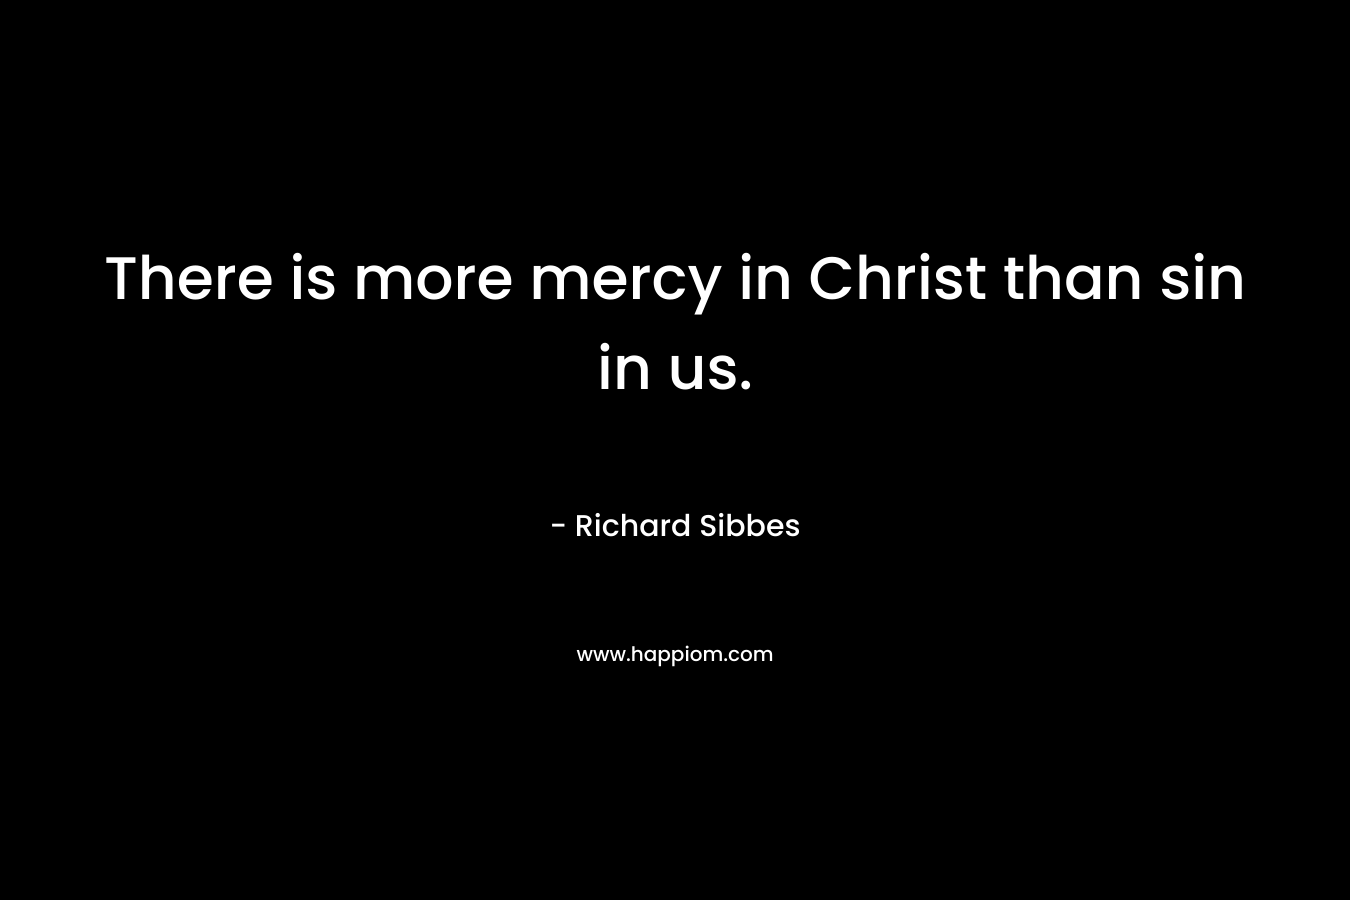 There is more mercy in Christ than sin in us. – Richard Sibbes